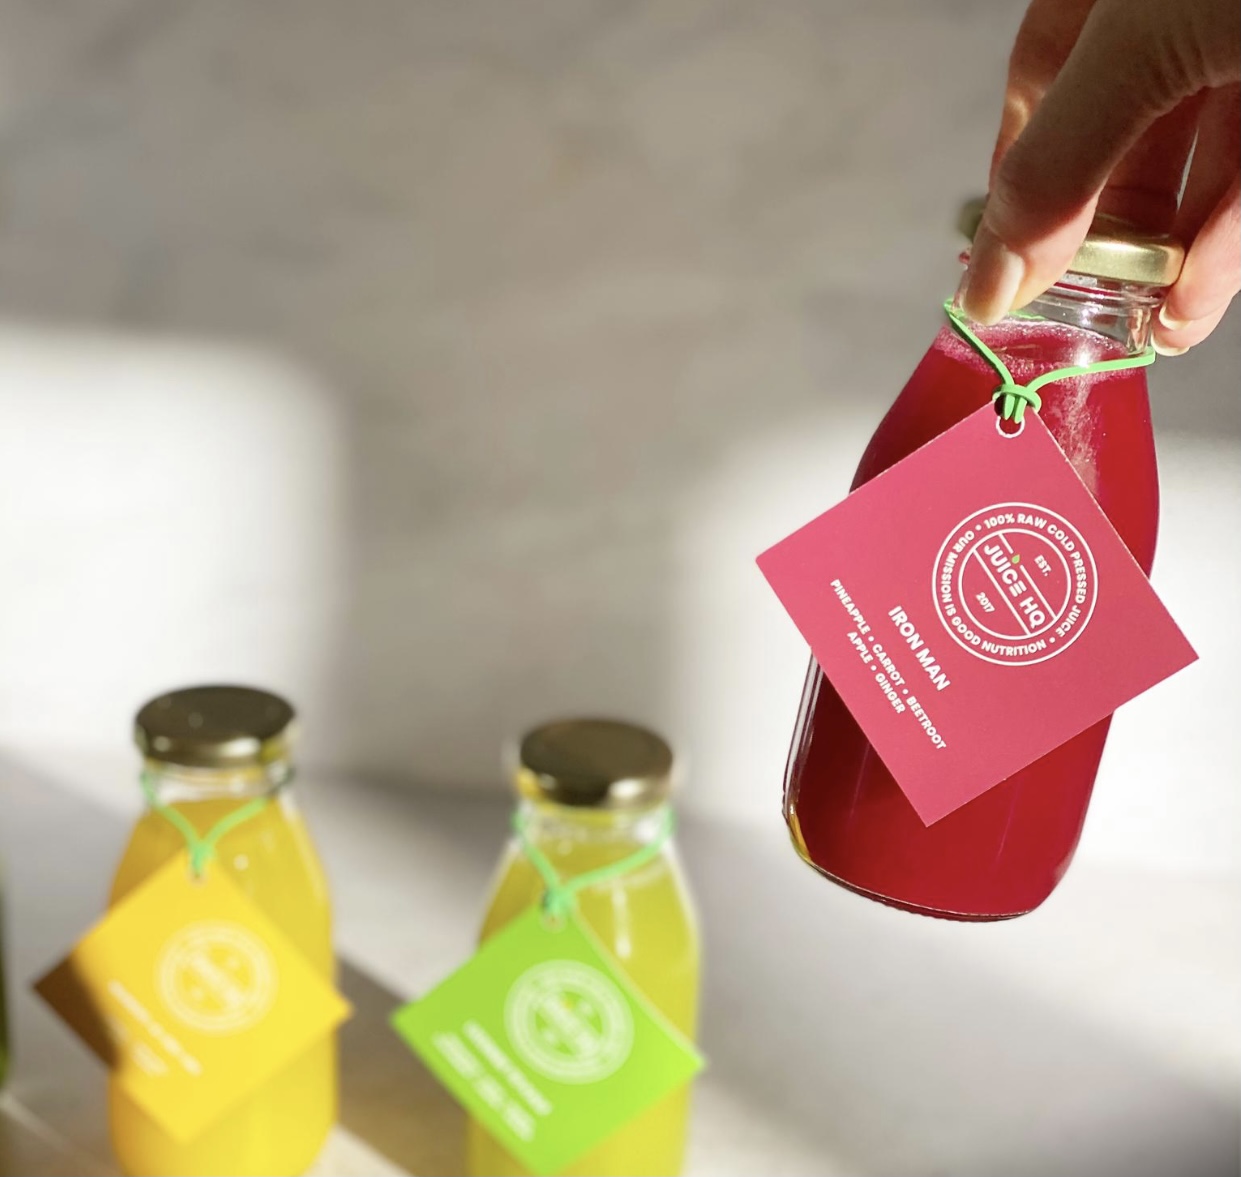 Juice HQ - Your Source for Fresh and Nutrient-Rich Cold Pressed Juices